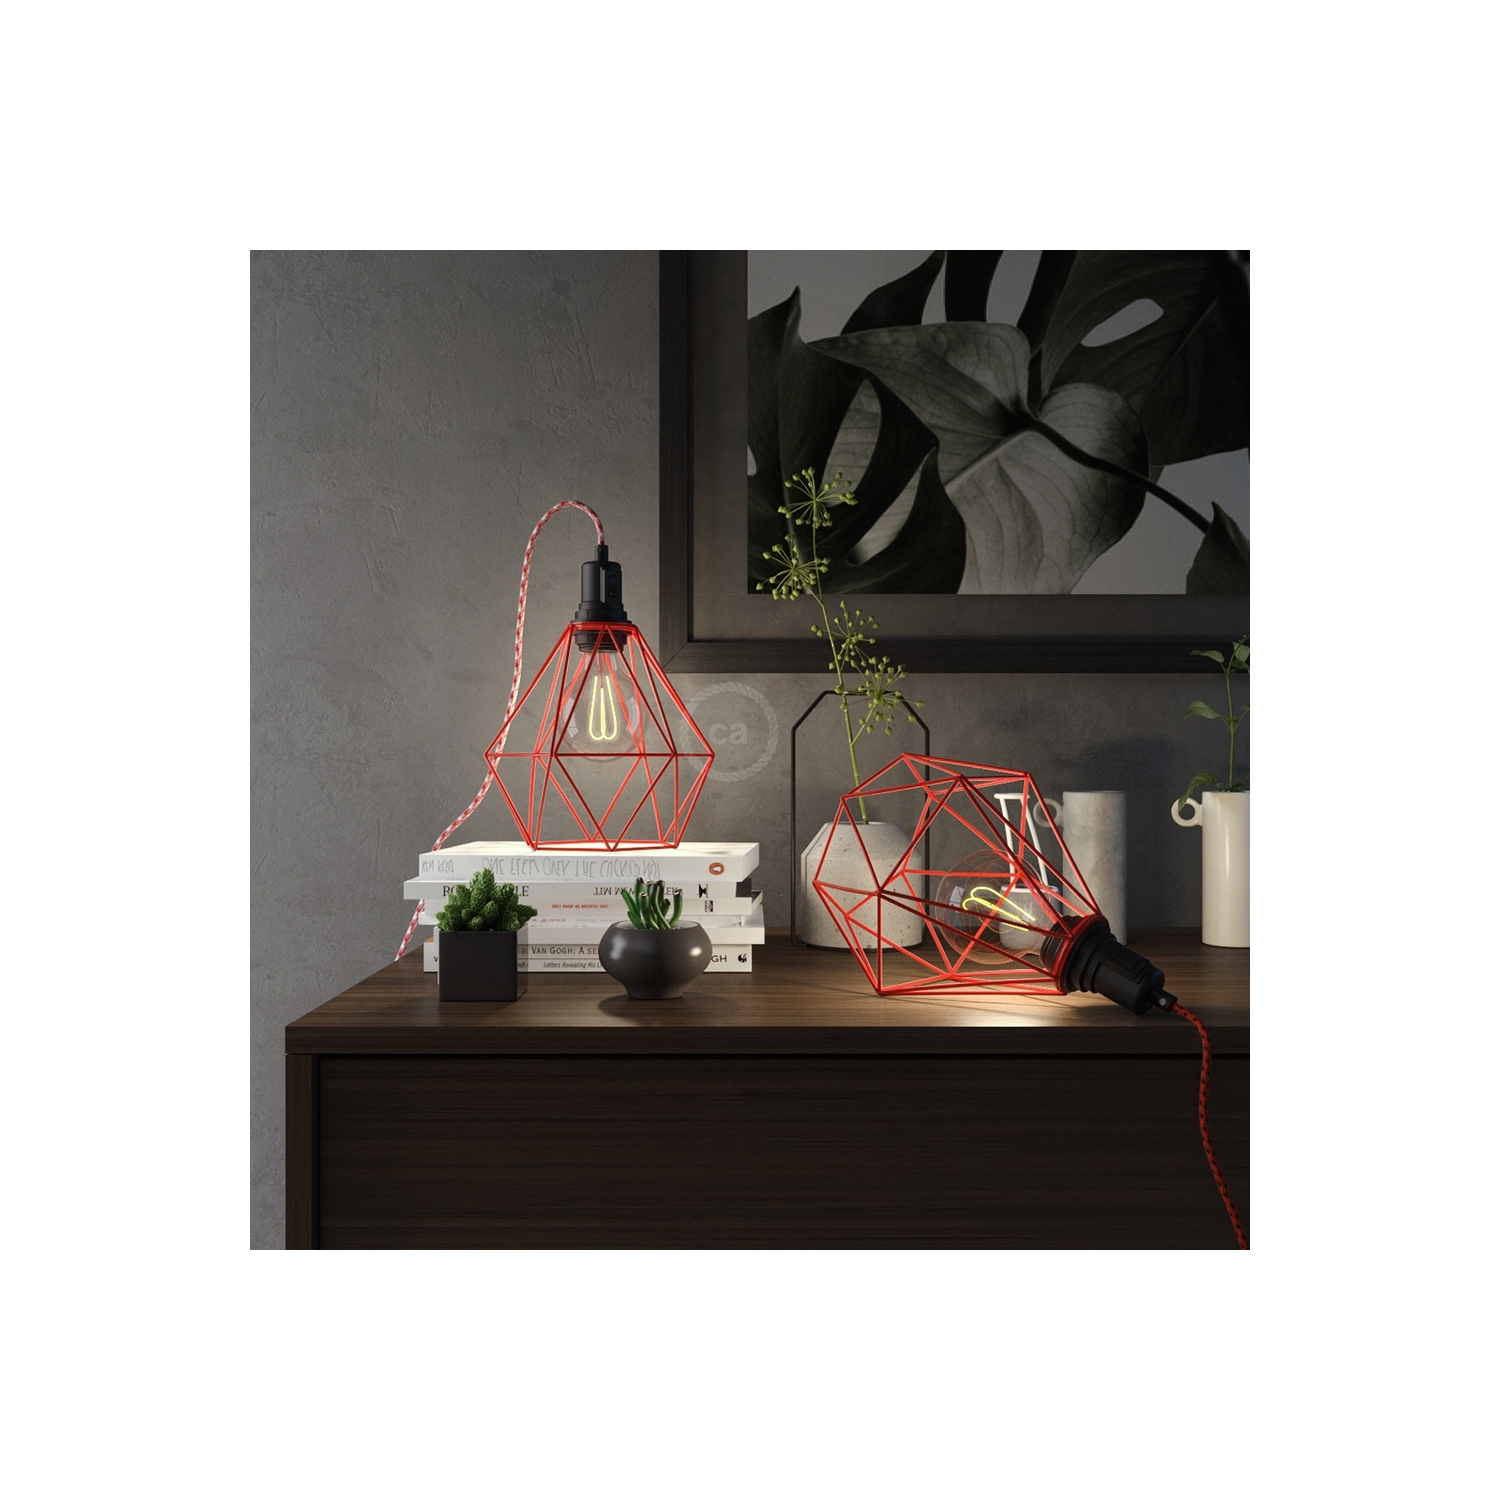 Table Snake - Table Lamp with Red Diamond light bulb cage